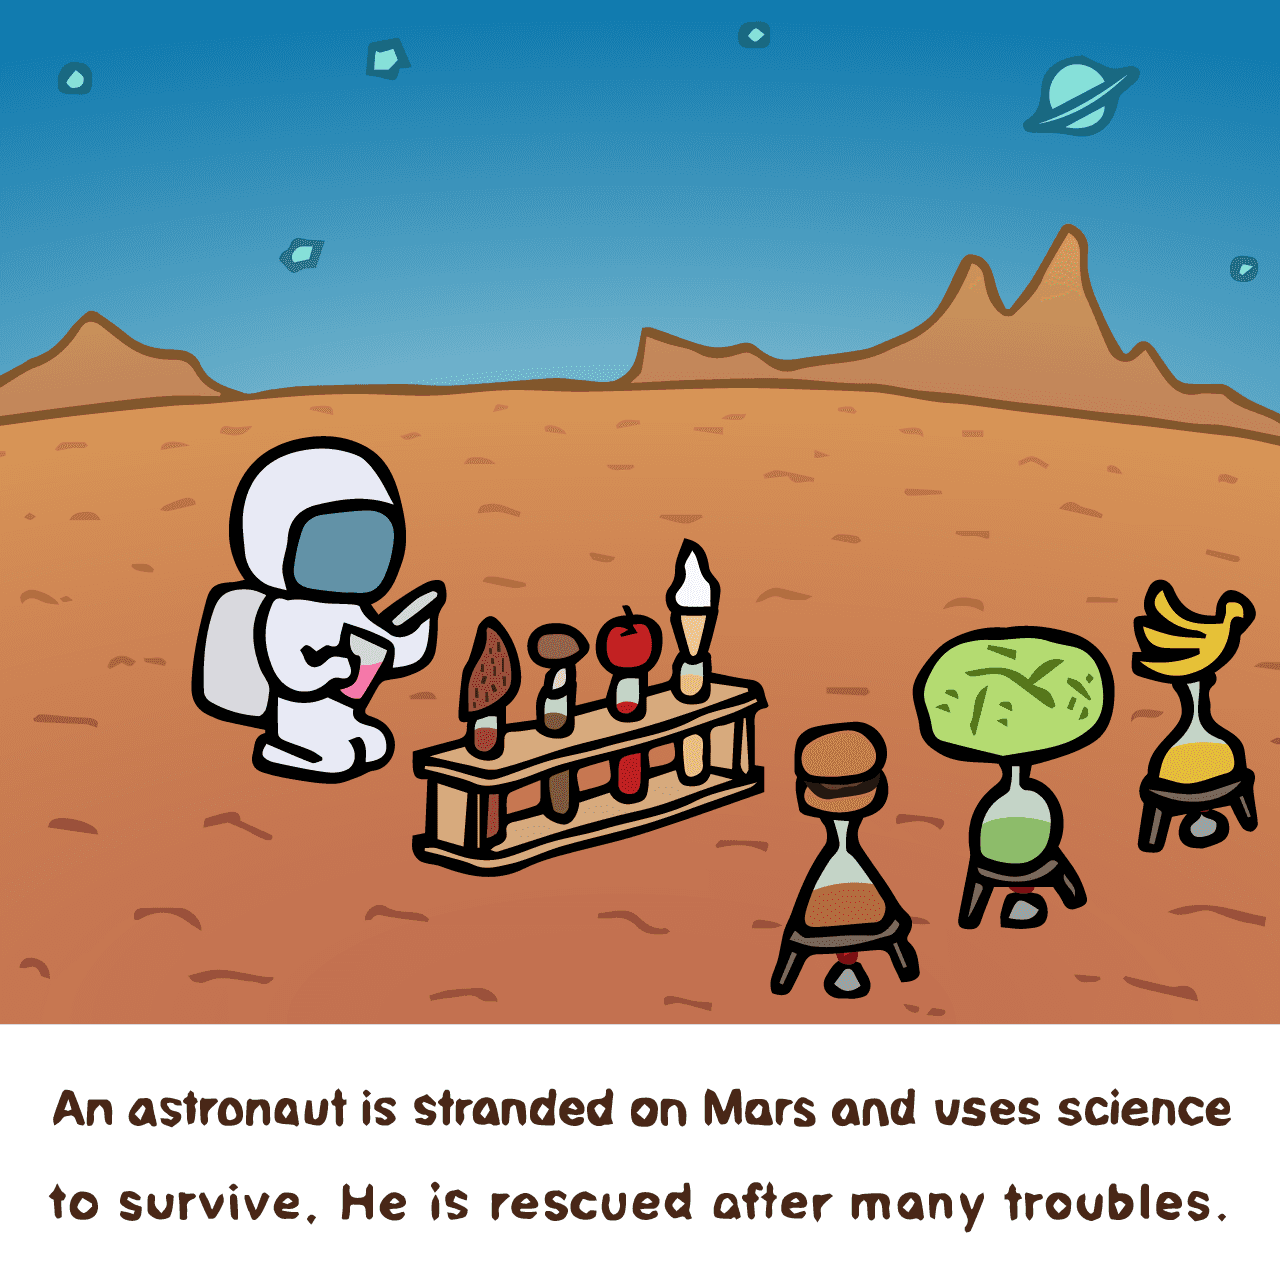 Andy Weir "The Martian : An astronaut is stranded on Mars and uses science to survive. He is rescued after many troubles."